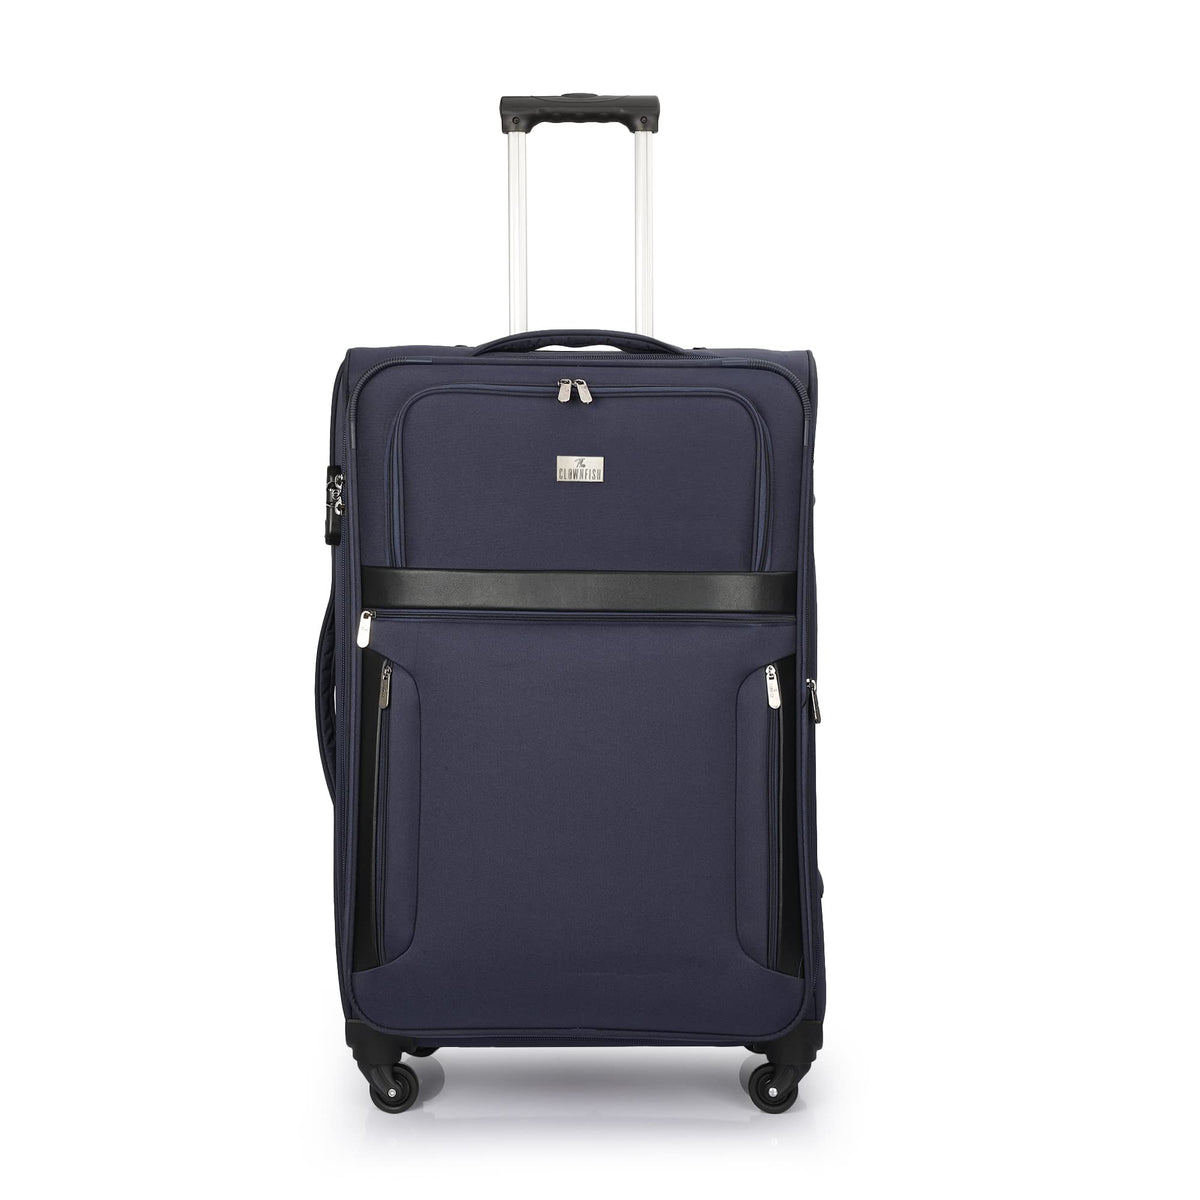 THE CLOWNFISH Combo of 3 Faramund Series Luggage Polyester Softsided Suitcases Four Wheel Trolley Bags - Navy Blue (76 cm, 68 cm, 56 cm)